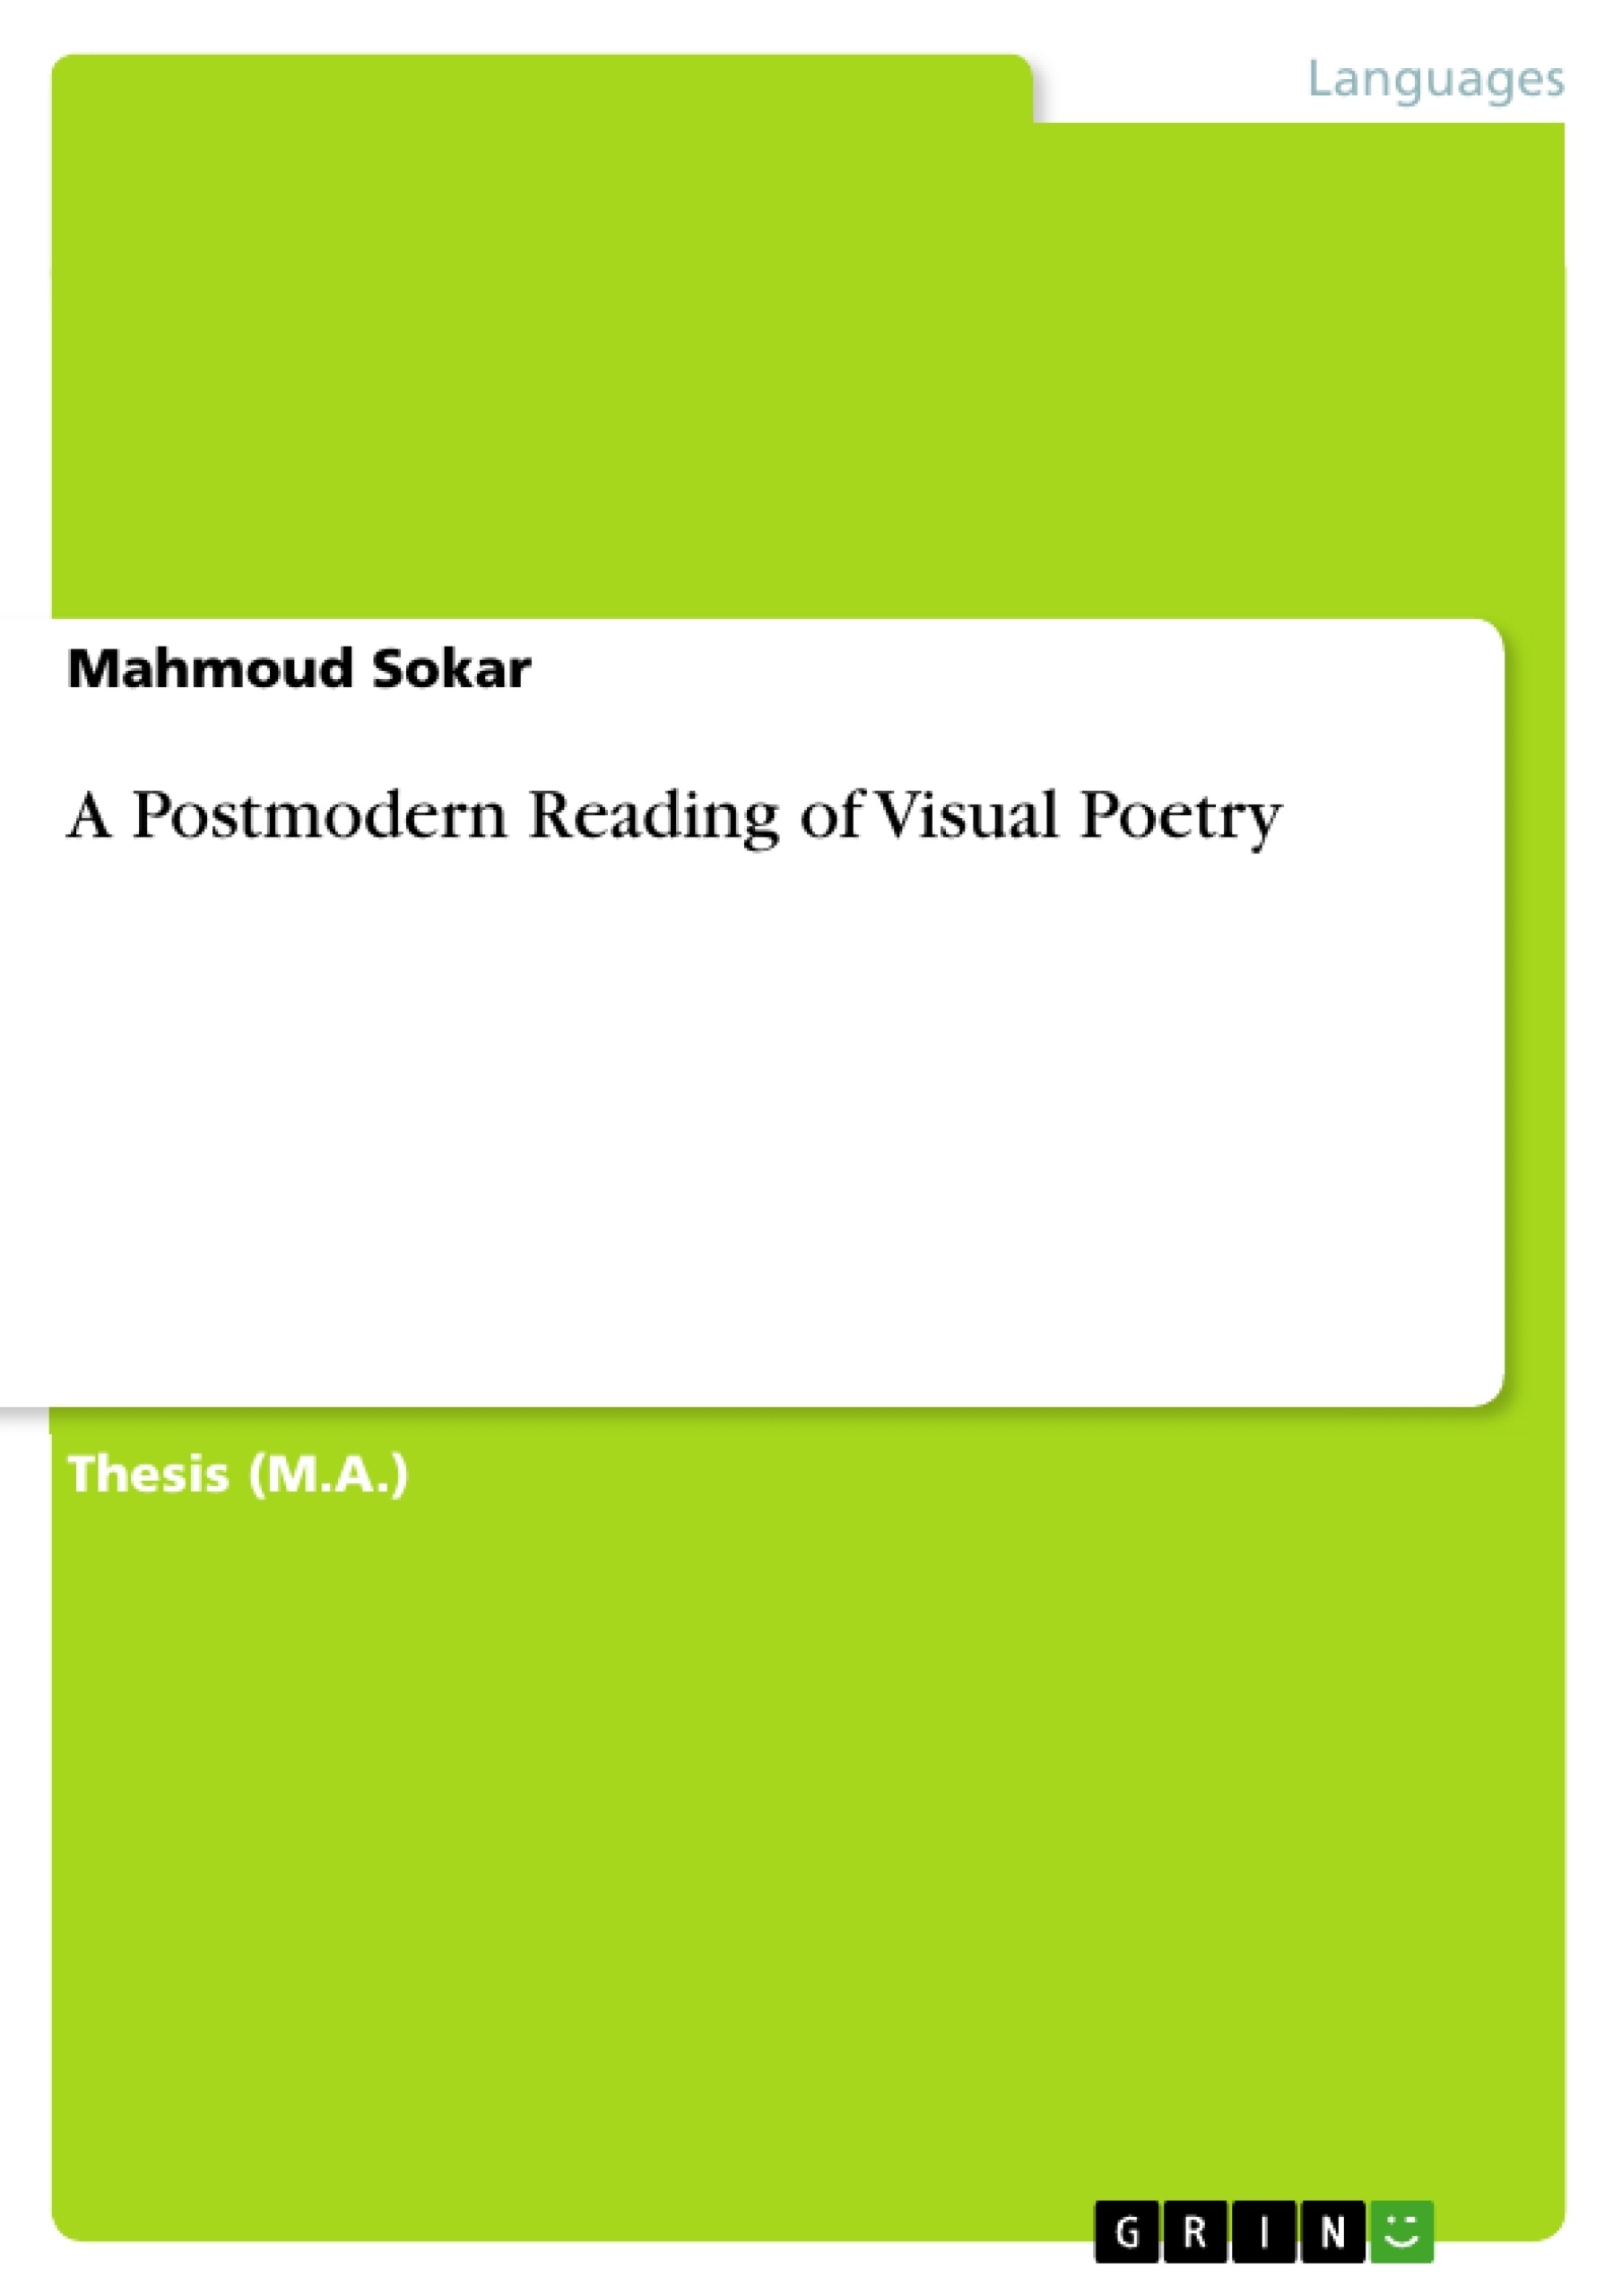 Title: A Postmodern Reading of Visual Poetry